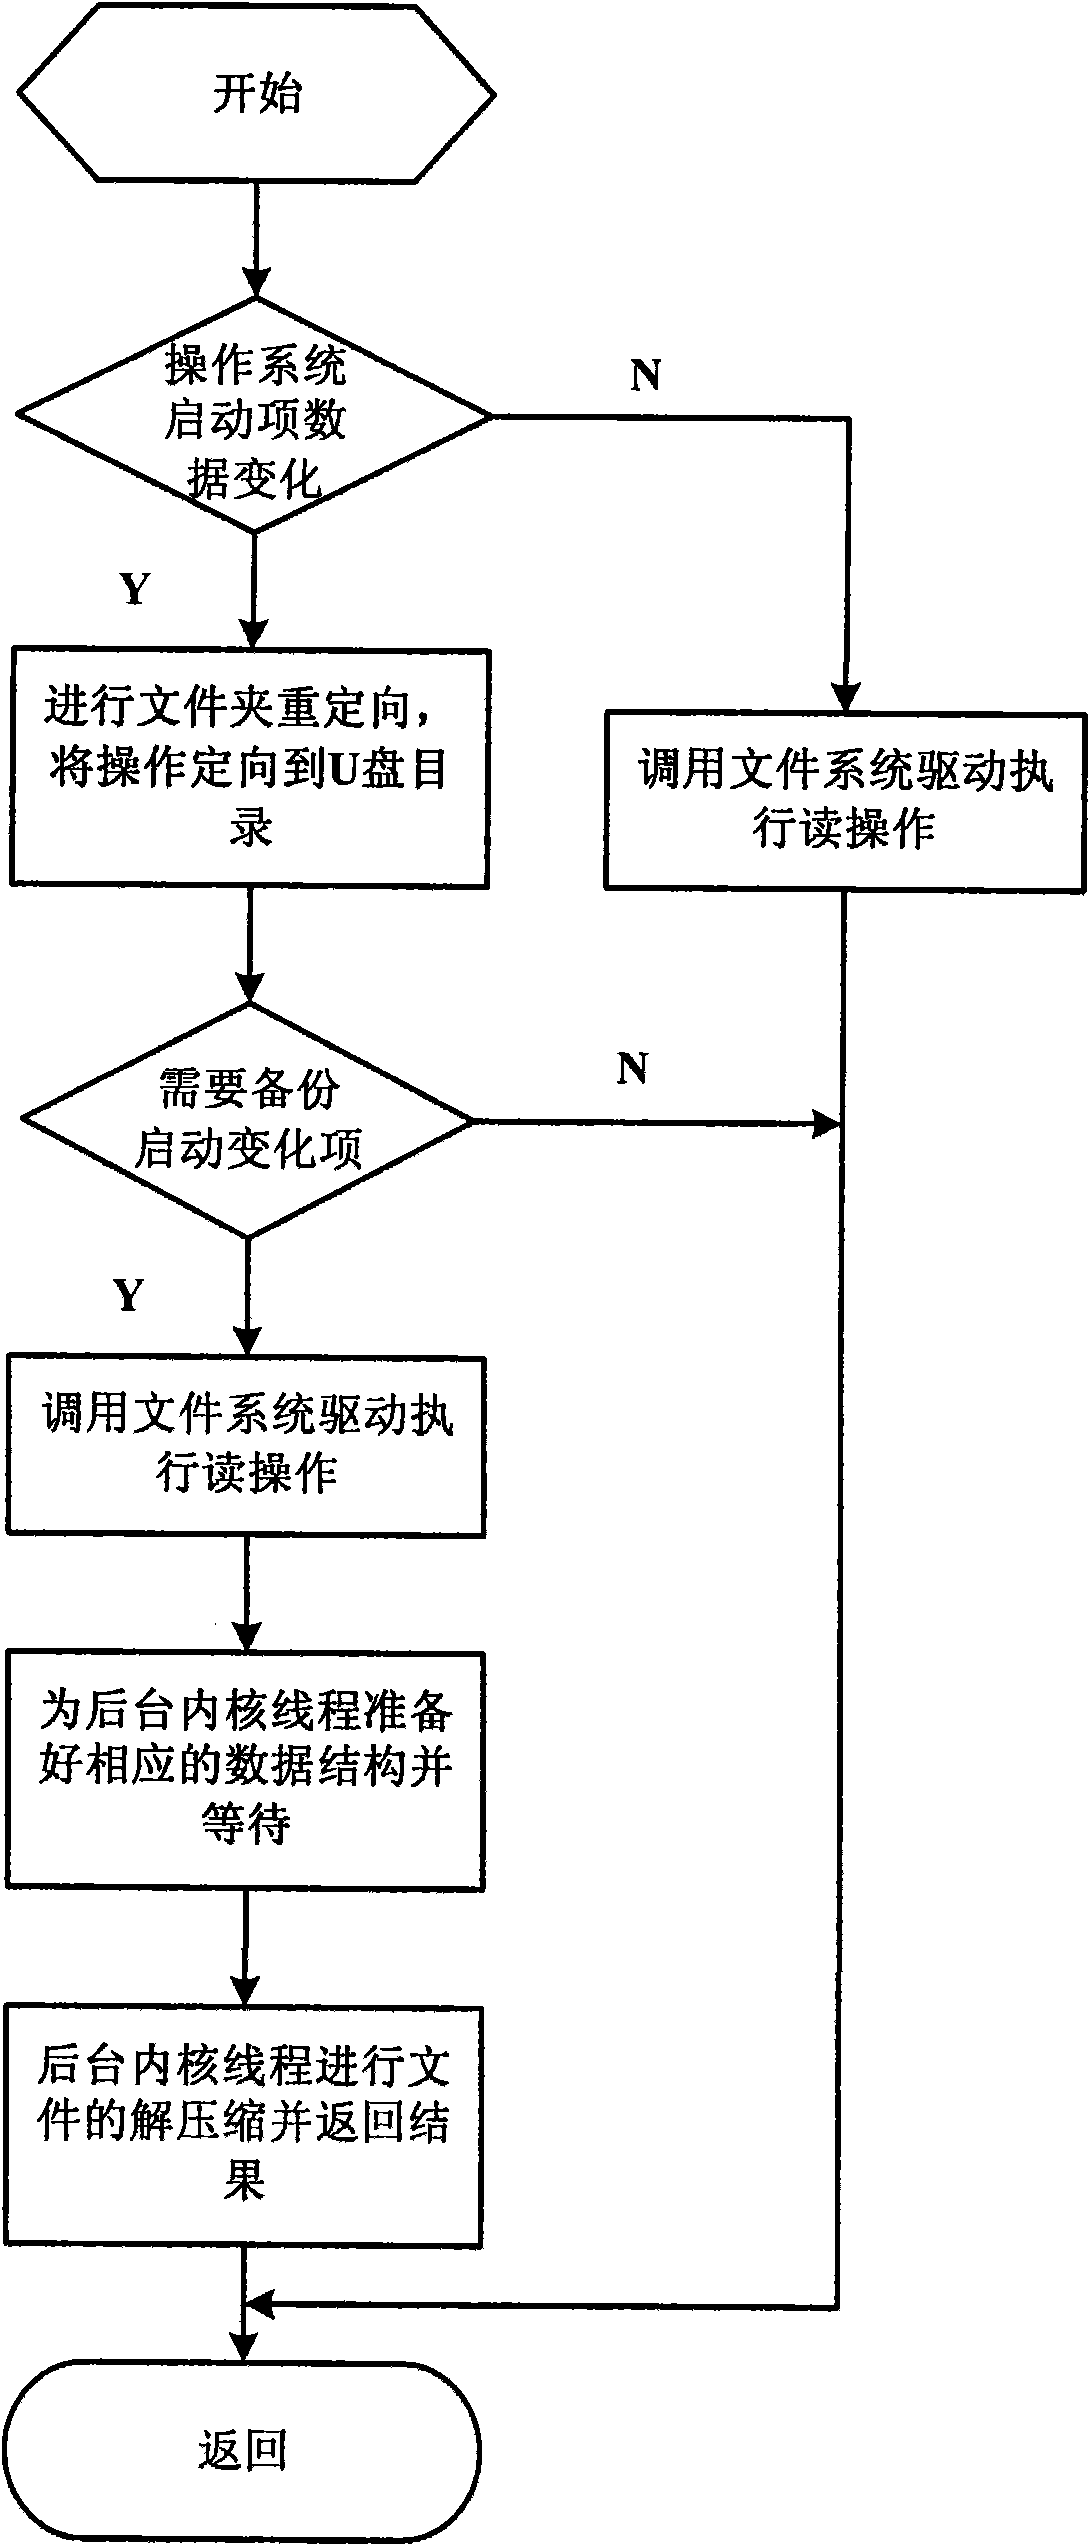 Method for monitoring and recovering by using external computer